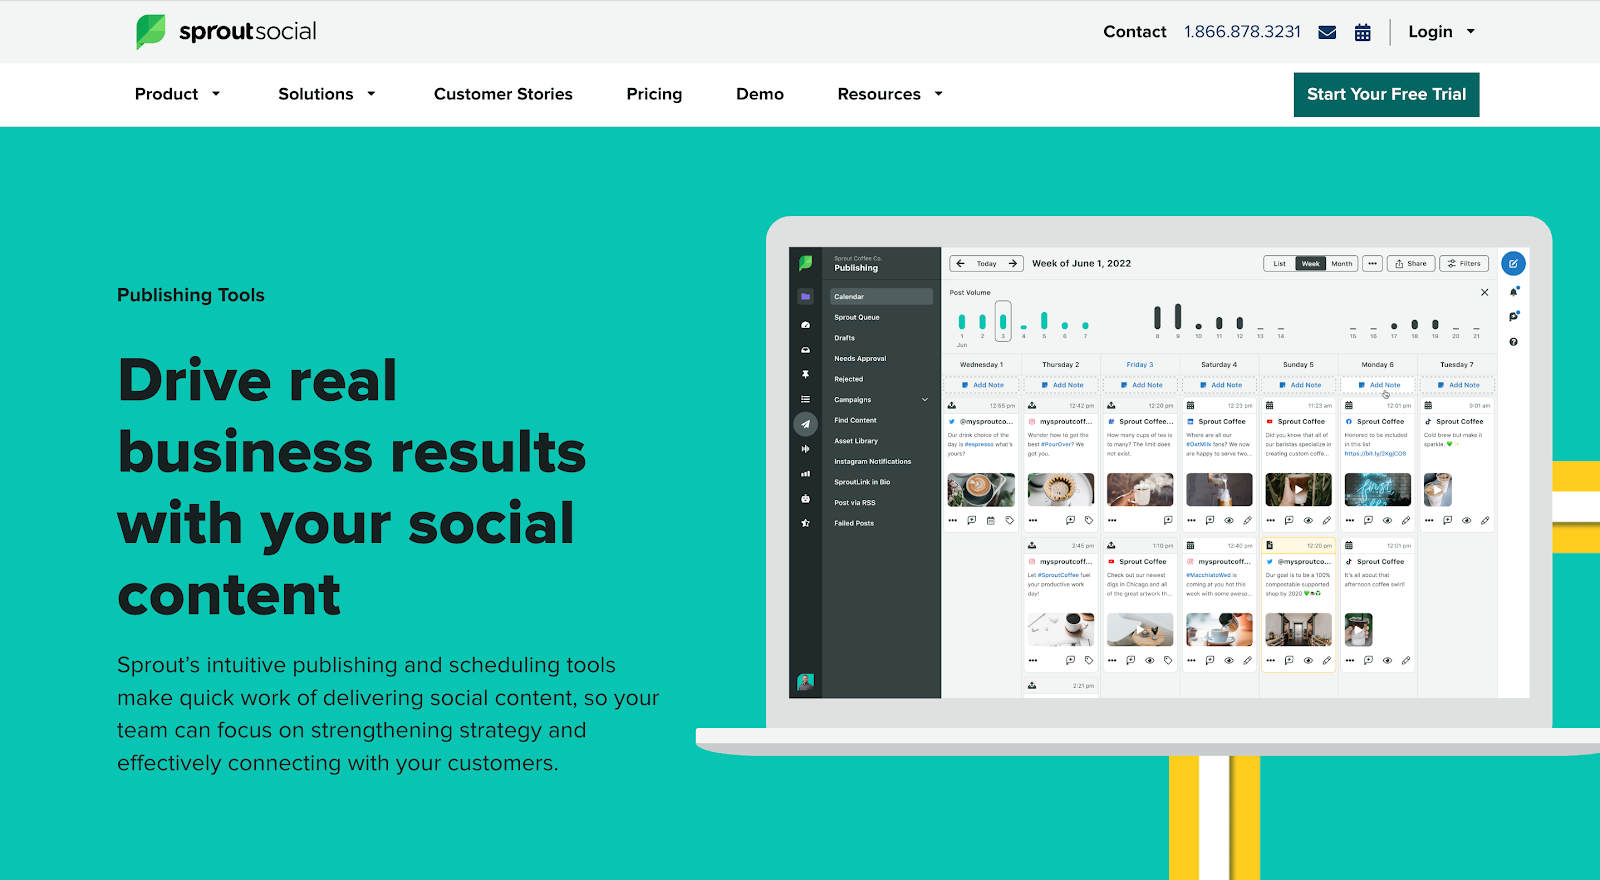 What Is the Social Media Management Tool Sprout Social?